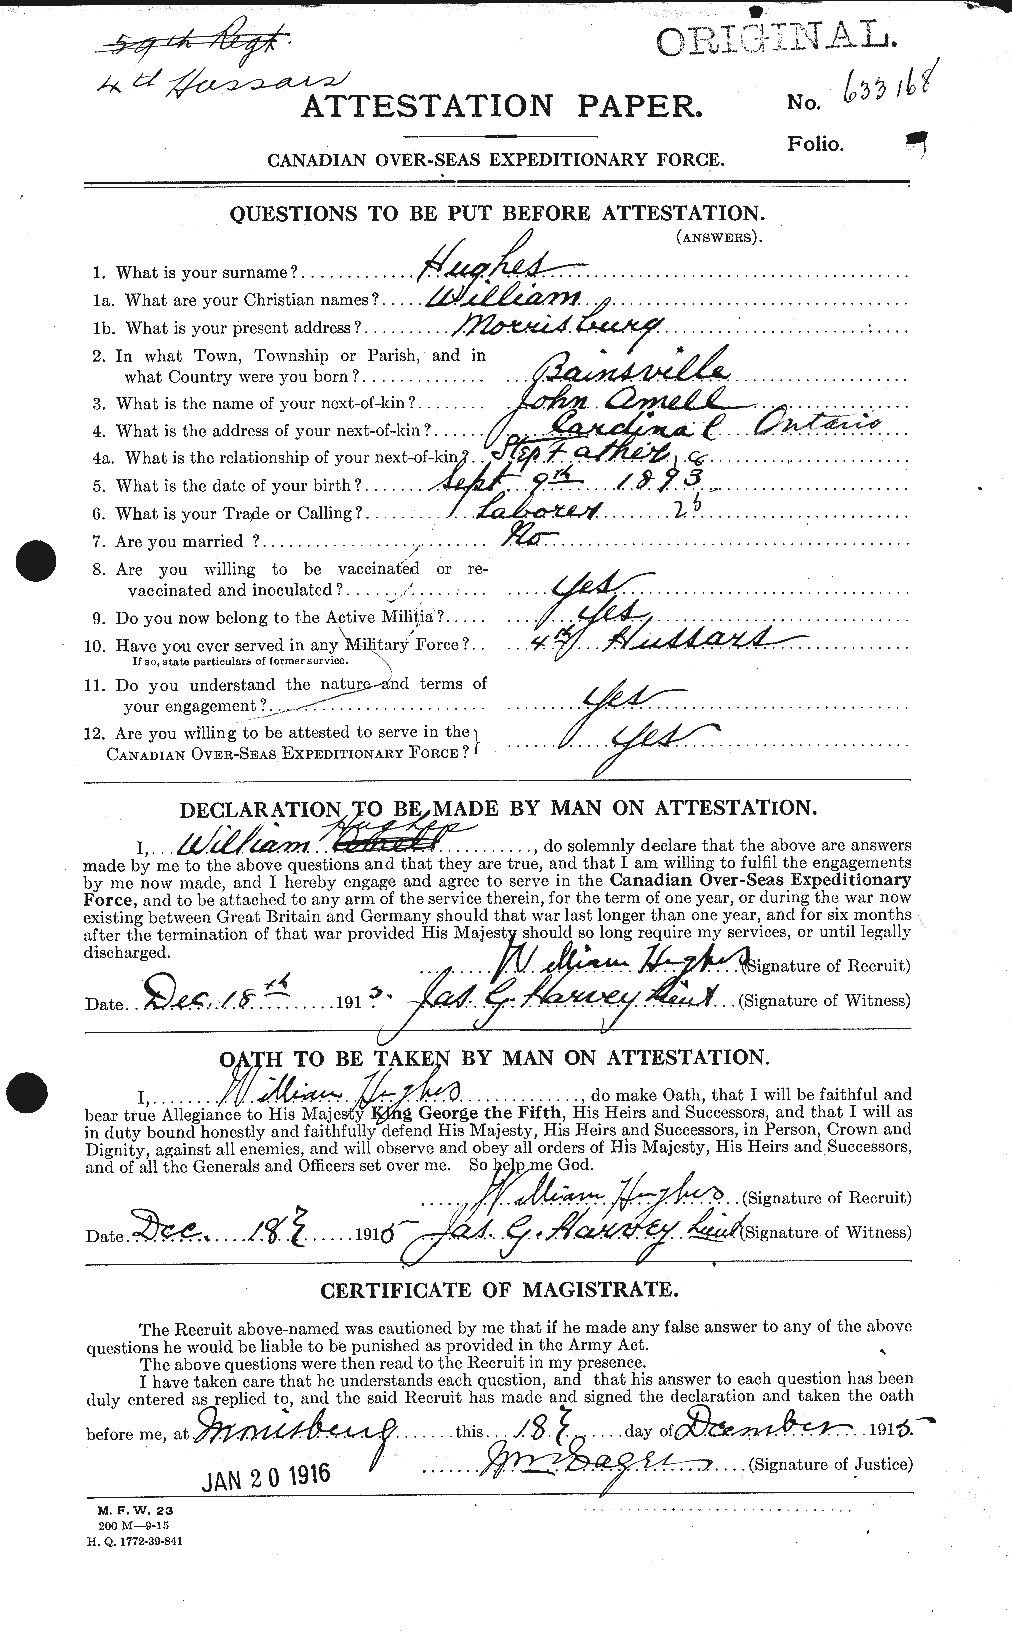 Personnel Records of the First World War - CEF 405887a